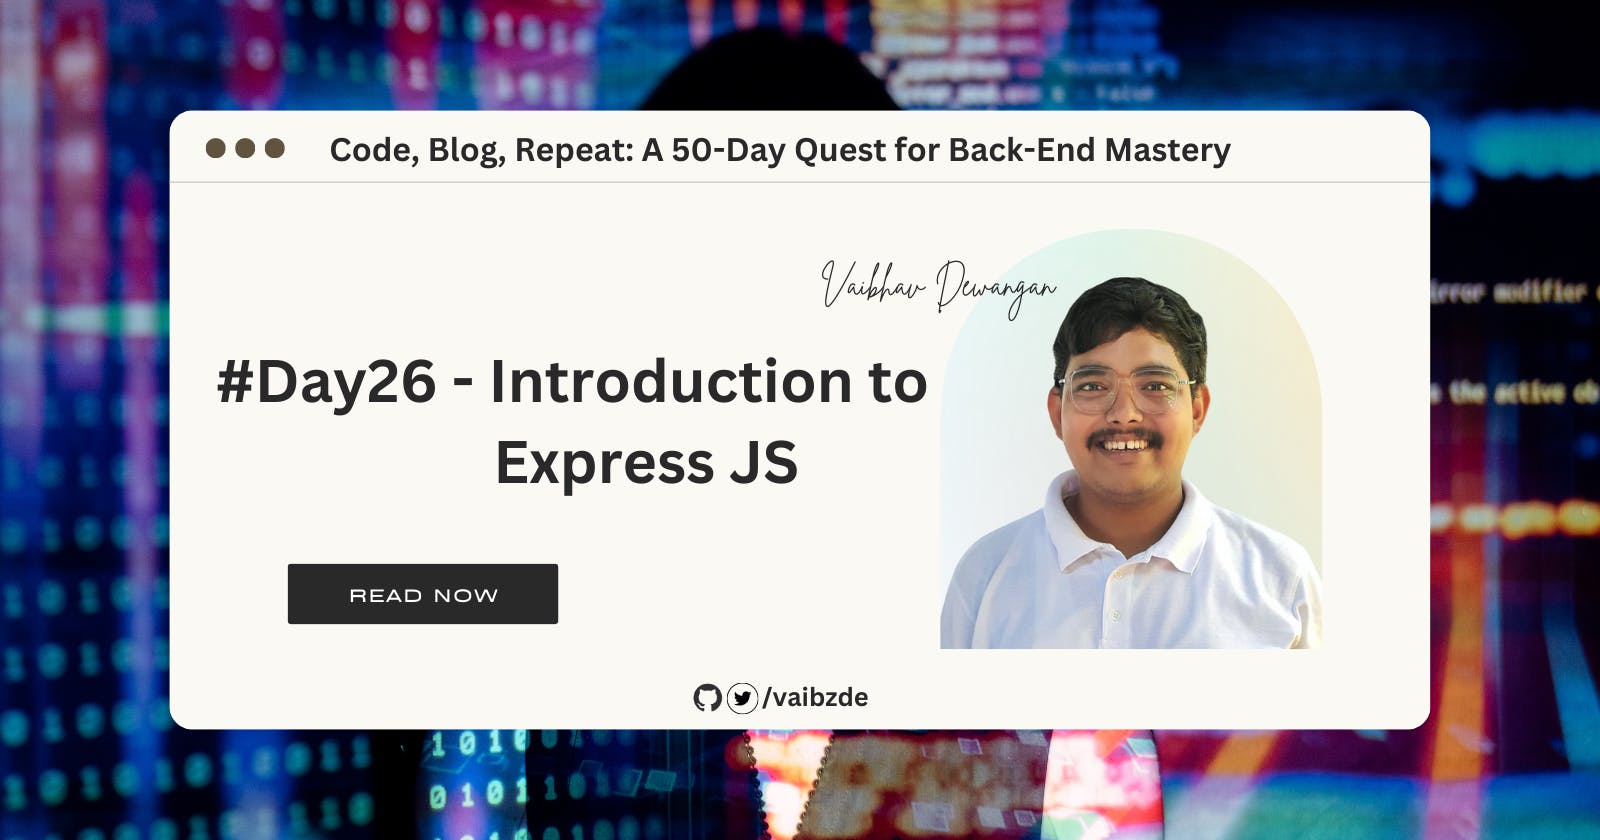 #Day26 - Introduction to Express JS